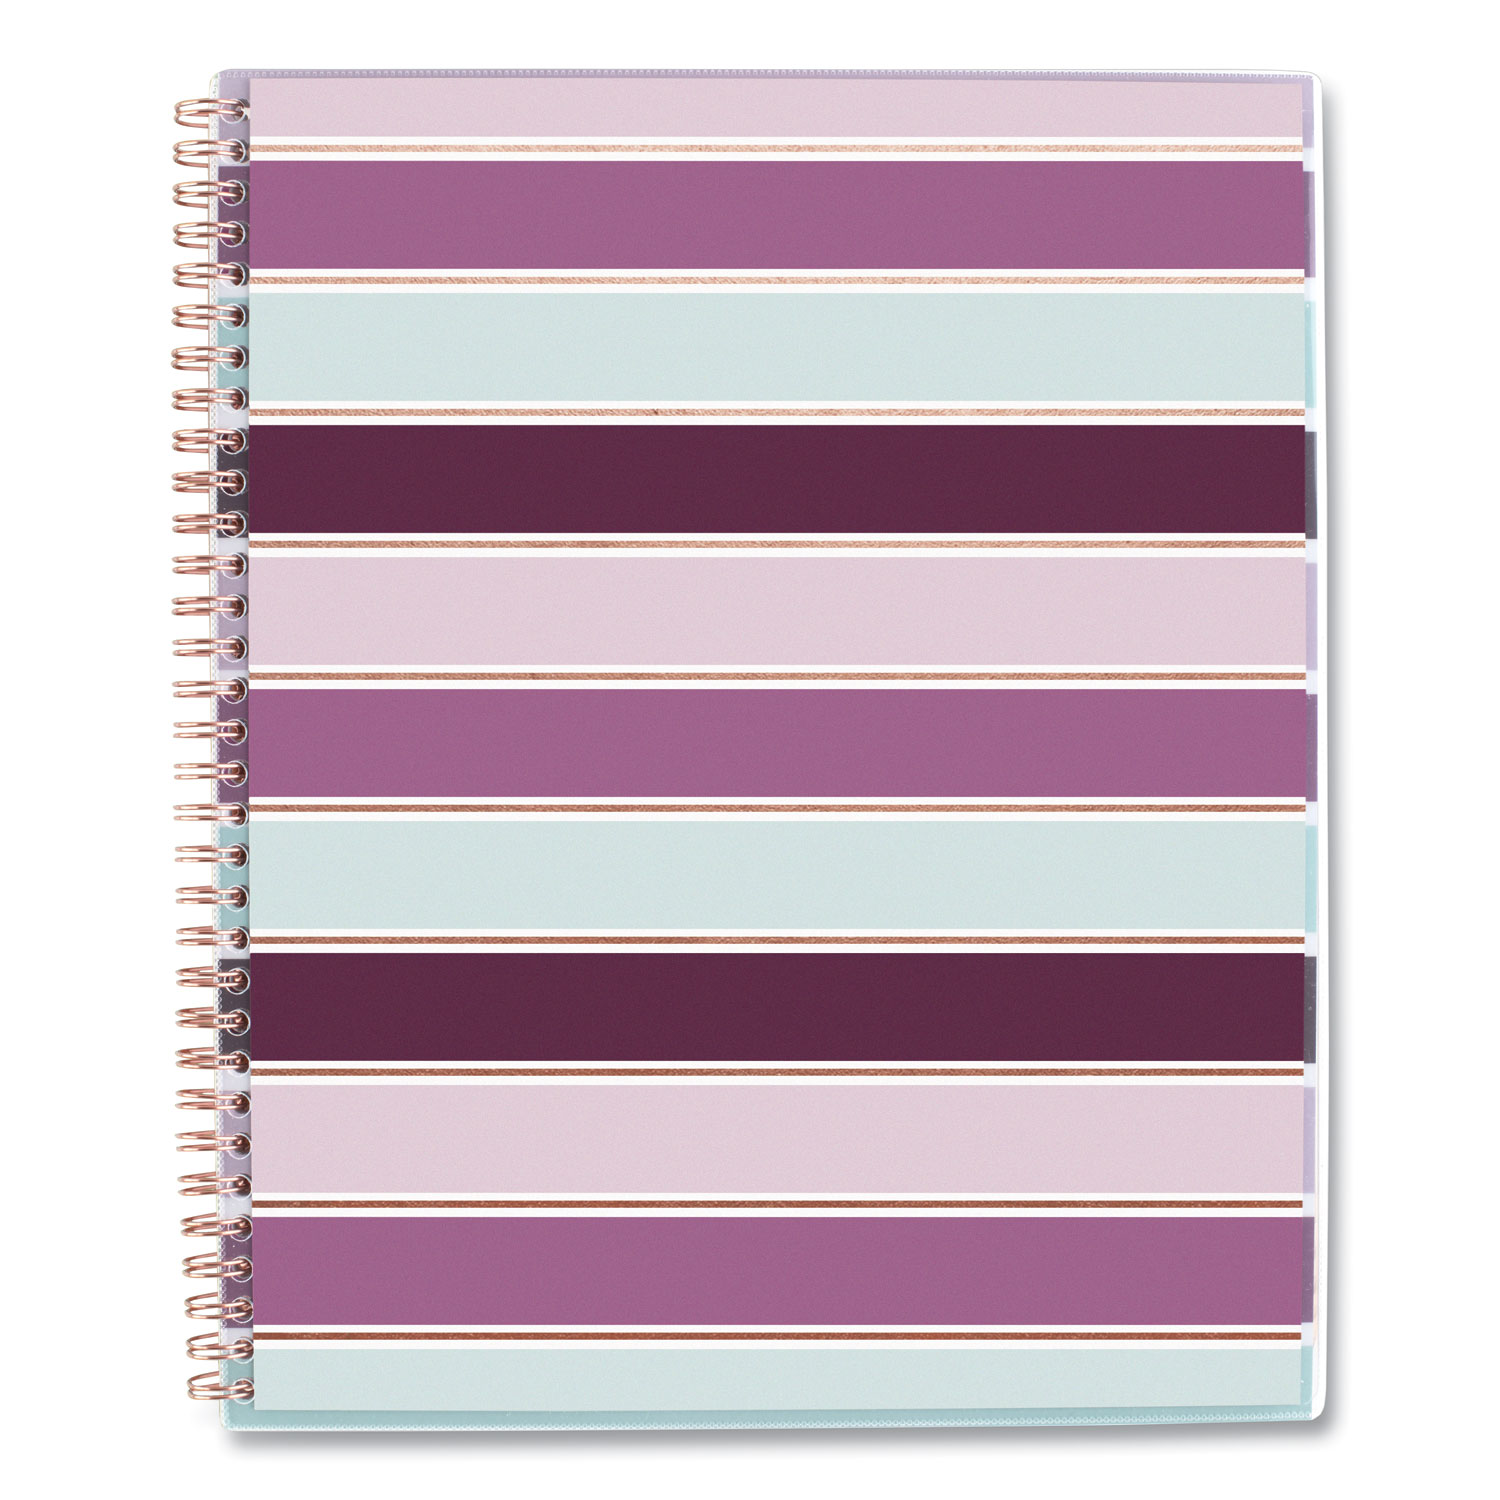  Cambridge 1455901 Ribbon Weekly/Monthly Planner, 11 x 8.5, Burgundy/Pink/Blue/White Striped, 2021 (AAG1455901) 